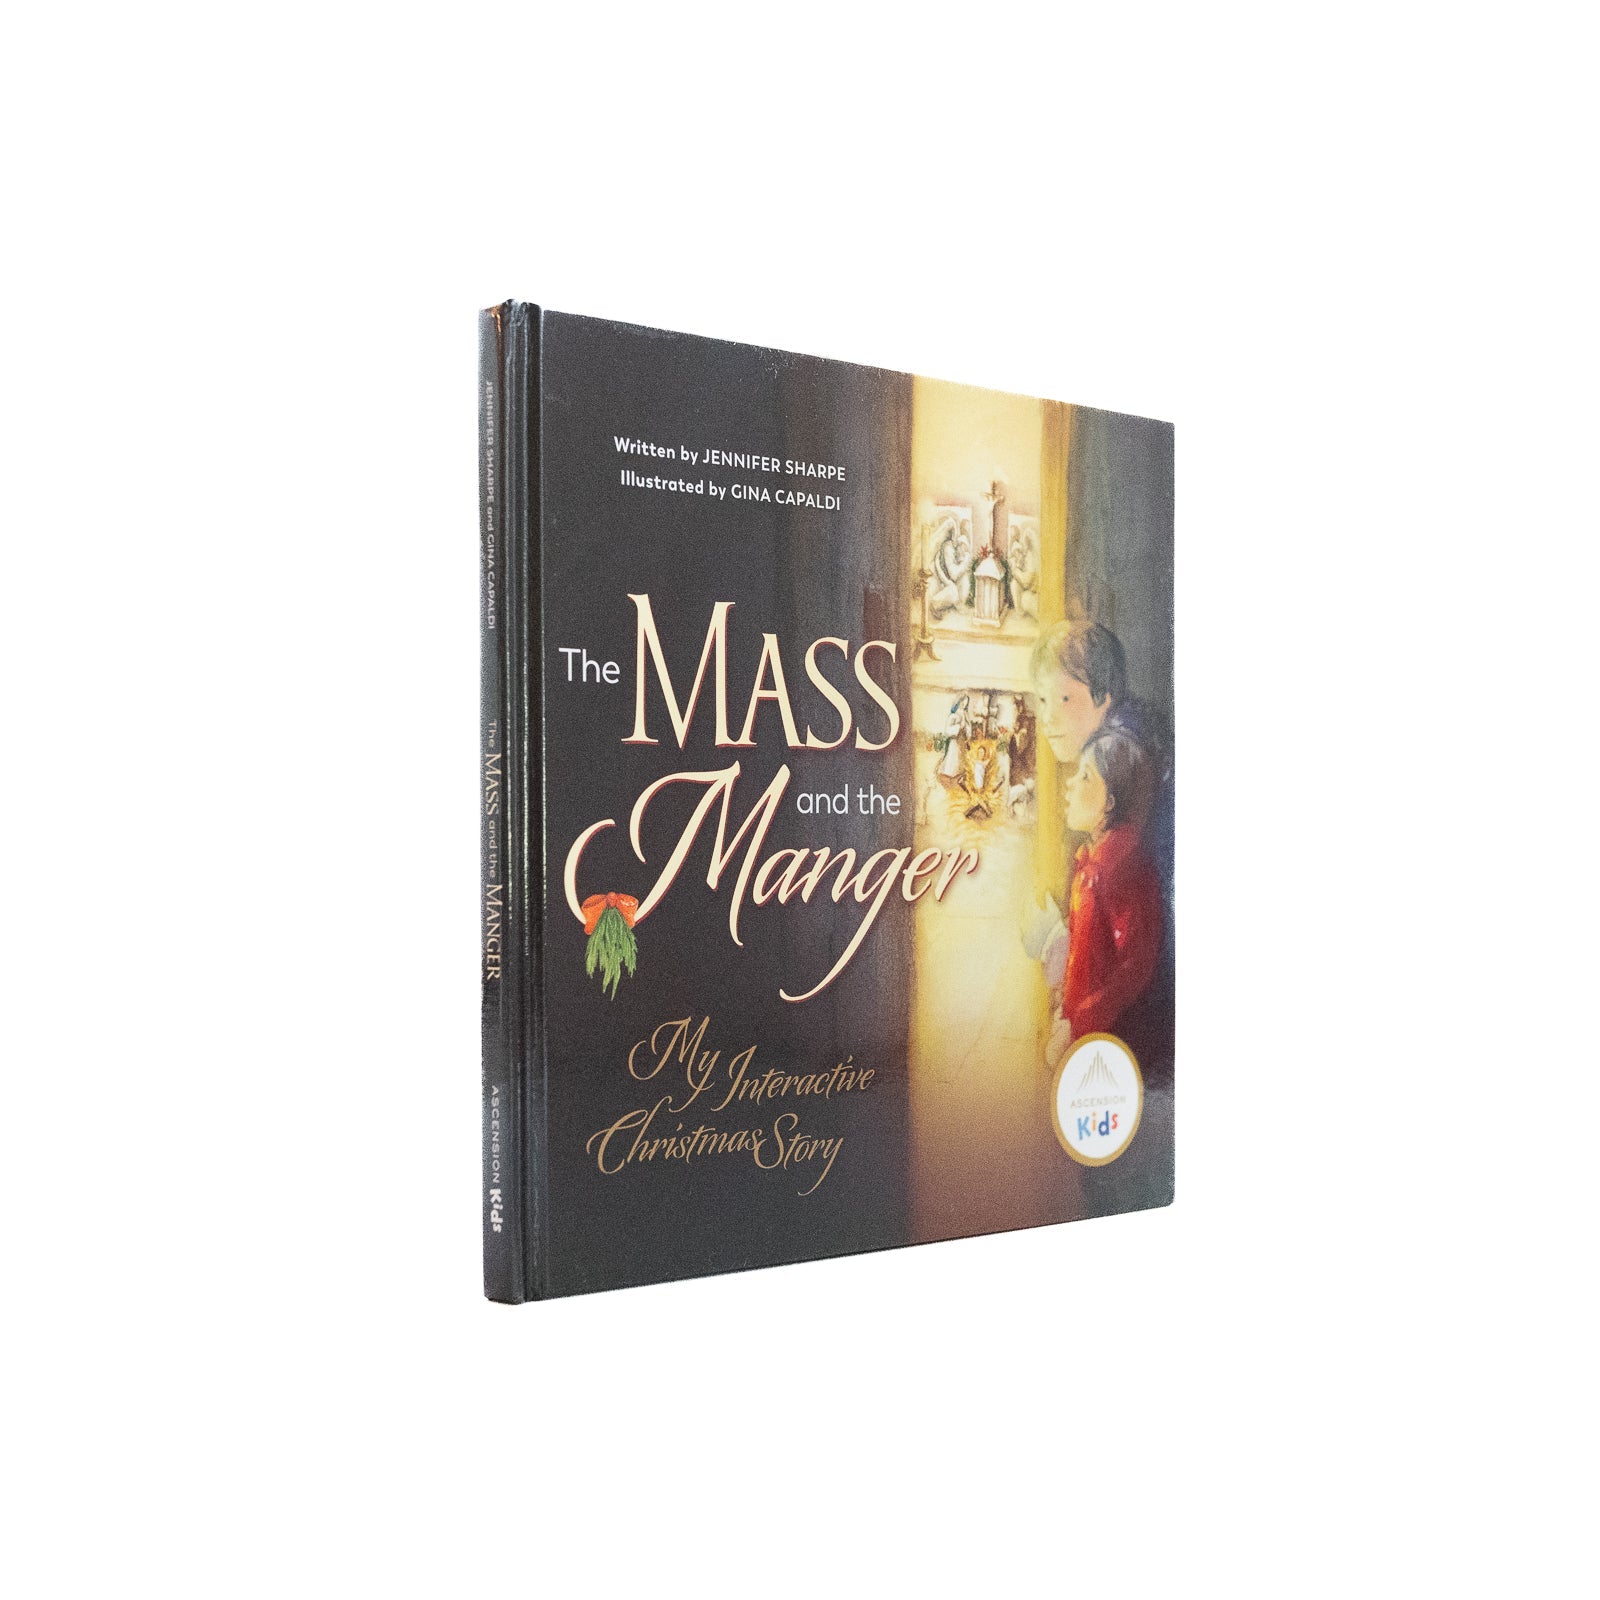 Mass and the Manger: My Interactive Christmas Story